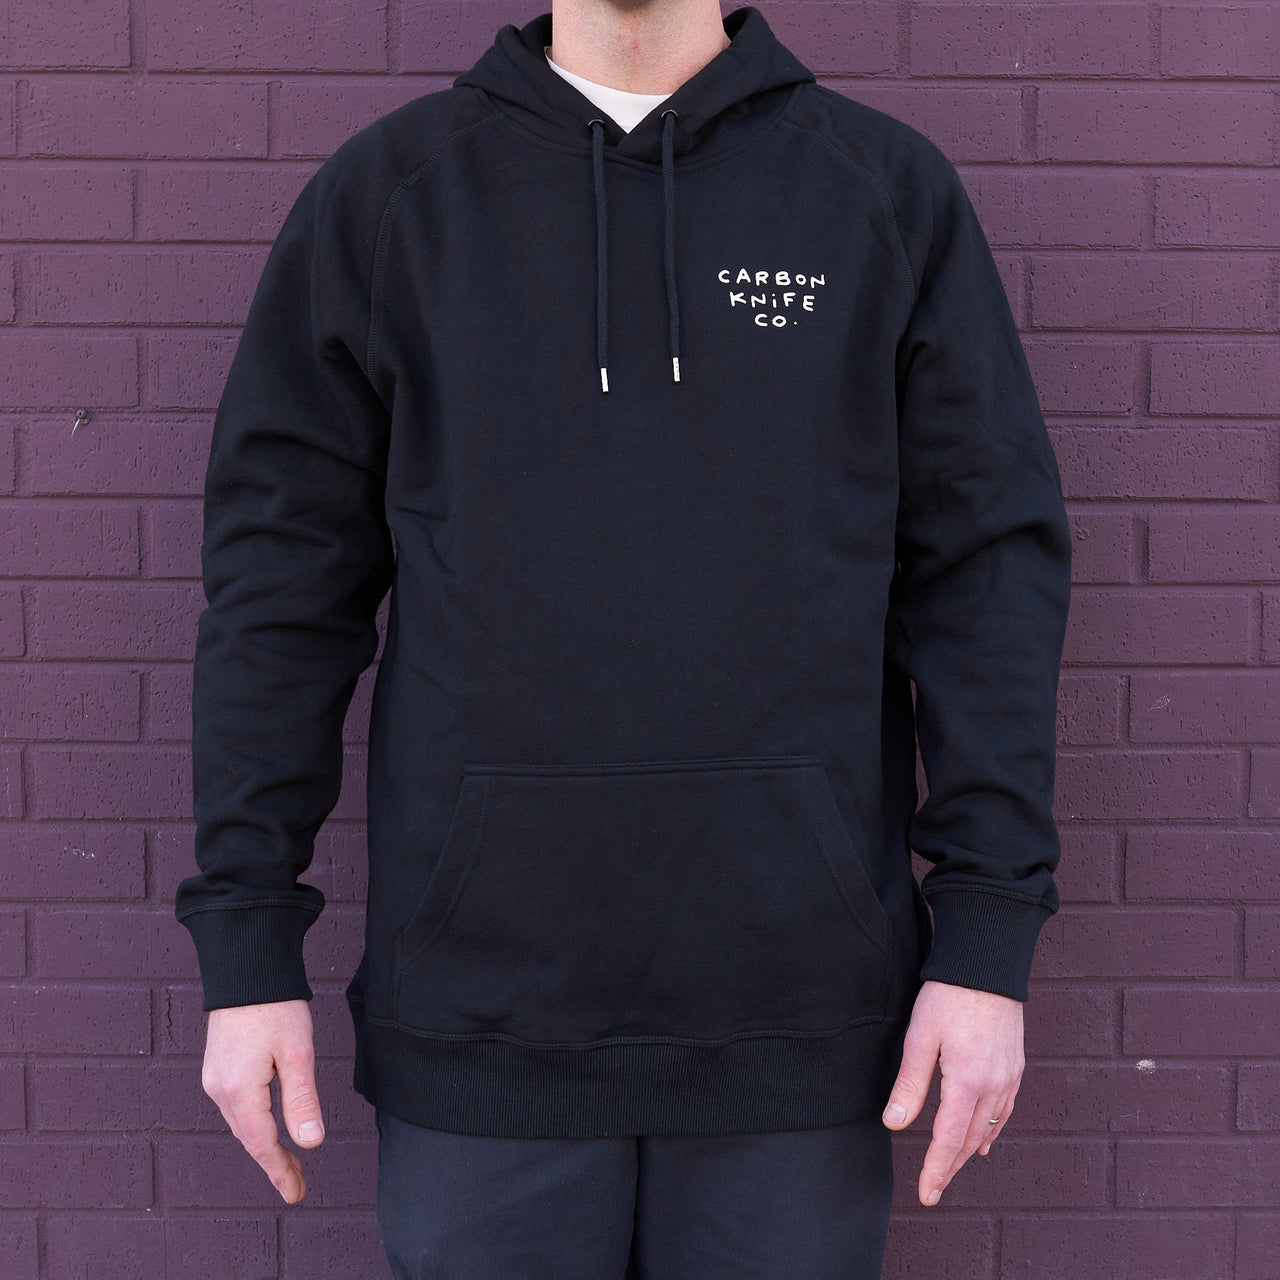 Carbon Knife Co "Tools" Black Hoodie-Carbon Knife Co-Small-Carbon Knife Co